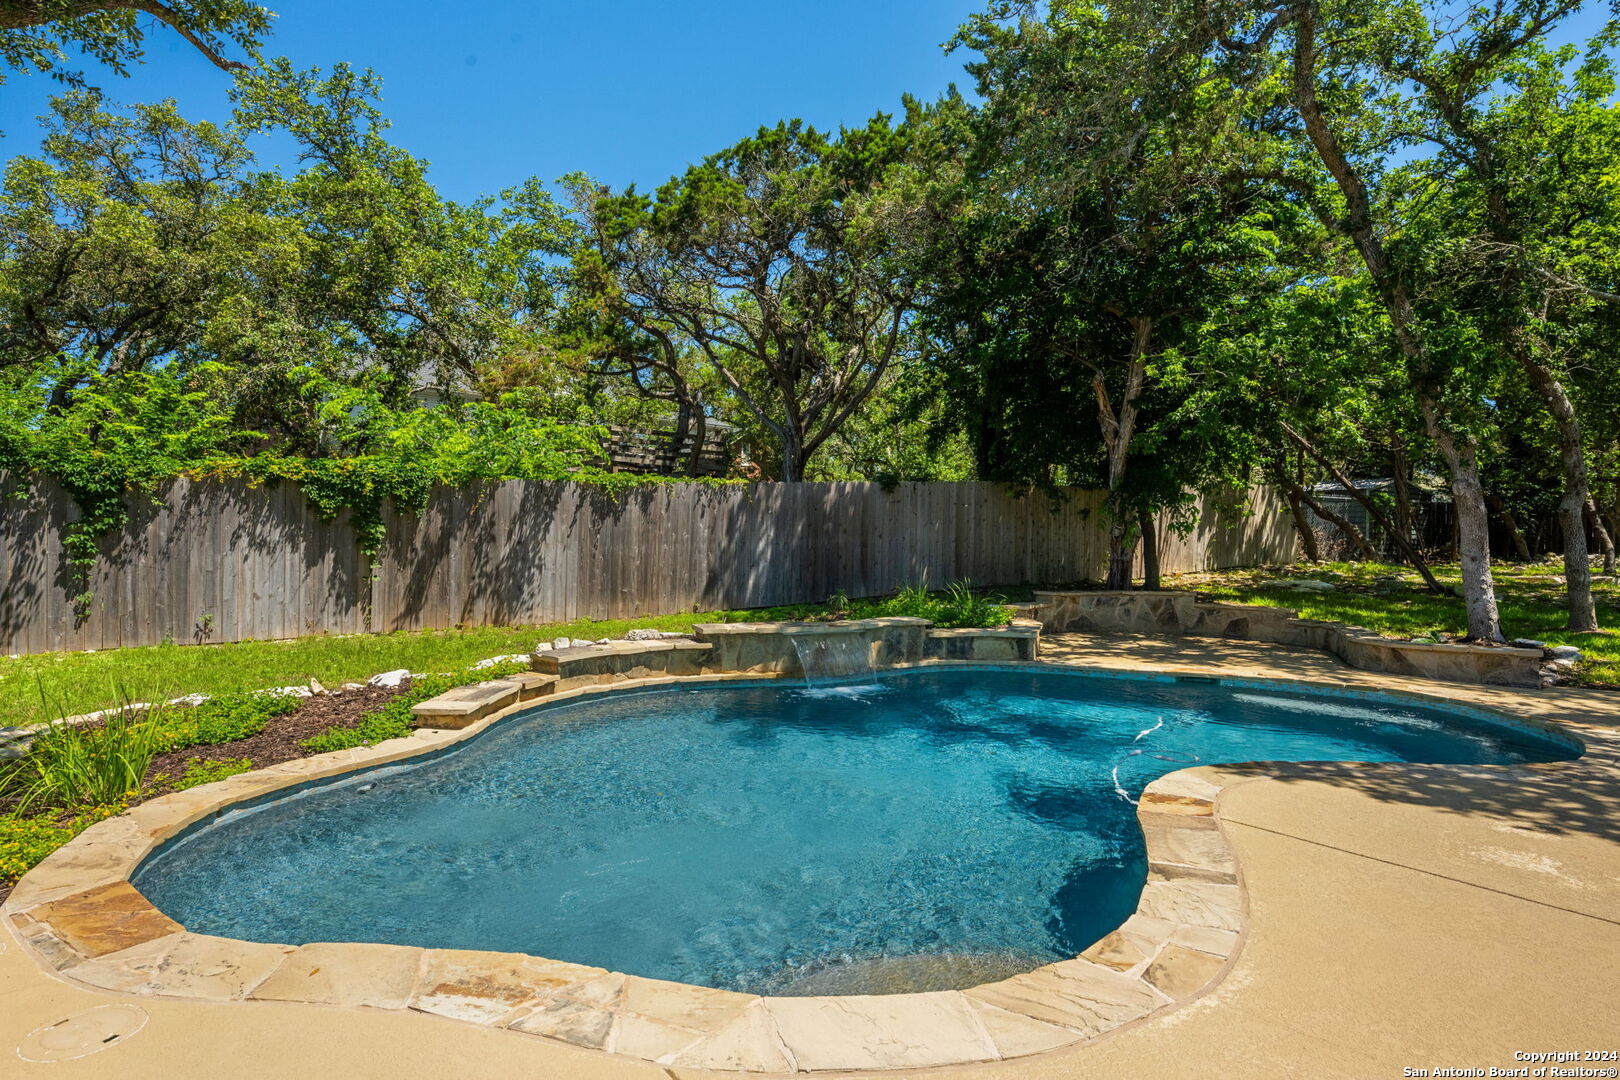 a view of swimming pool having patio